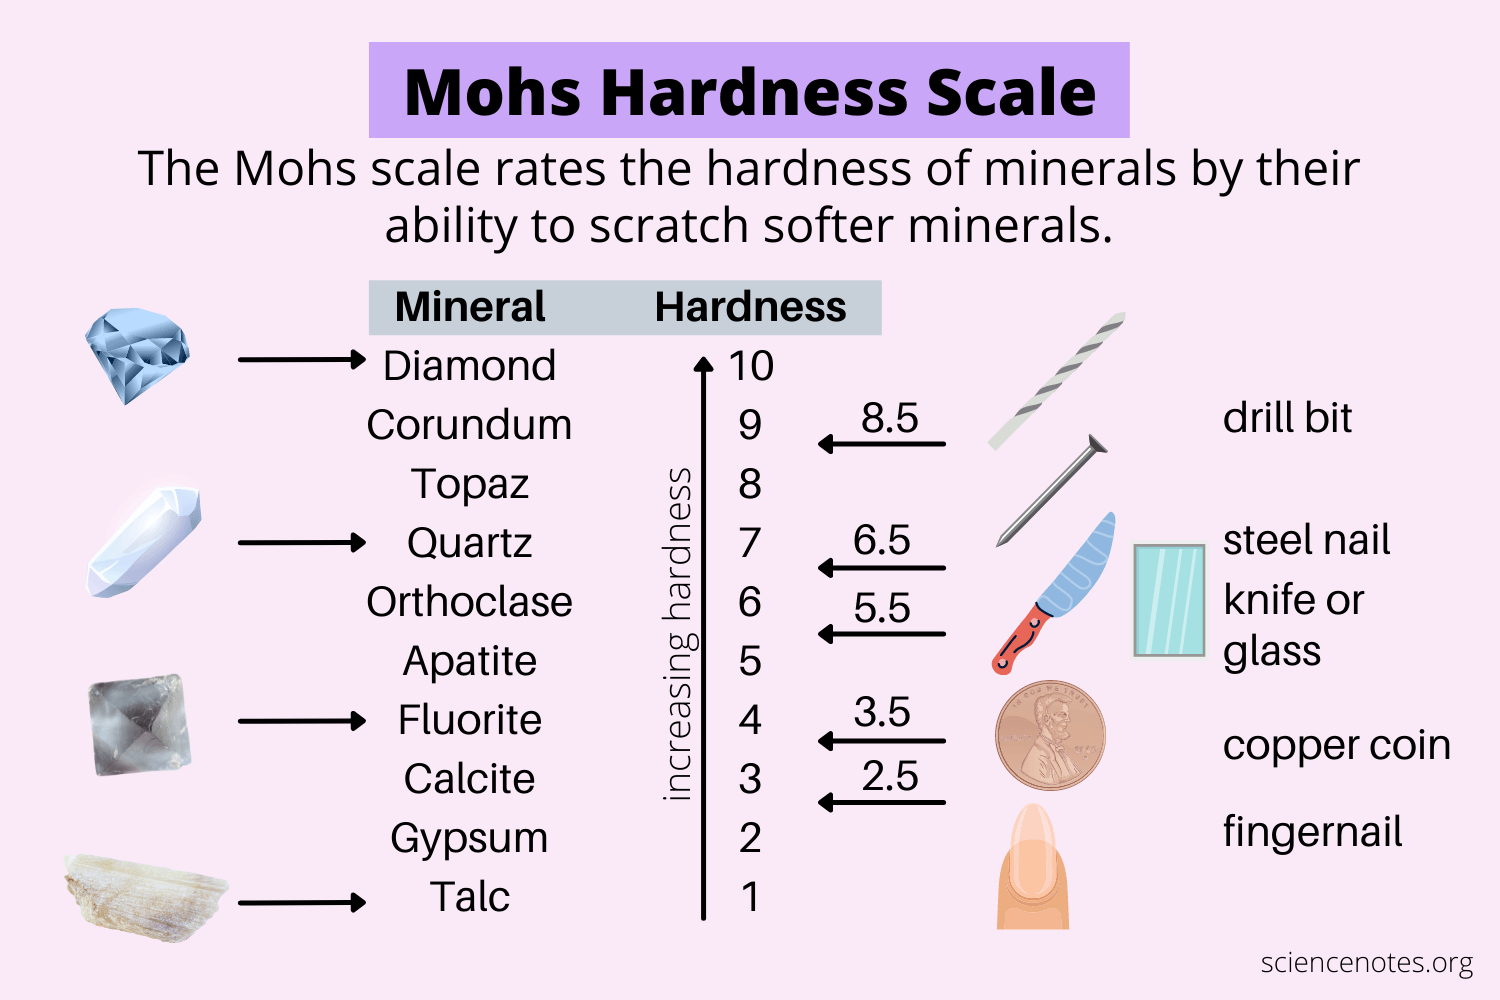 A picture of the Mohs Hardness Scale